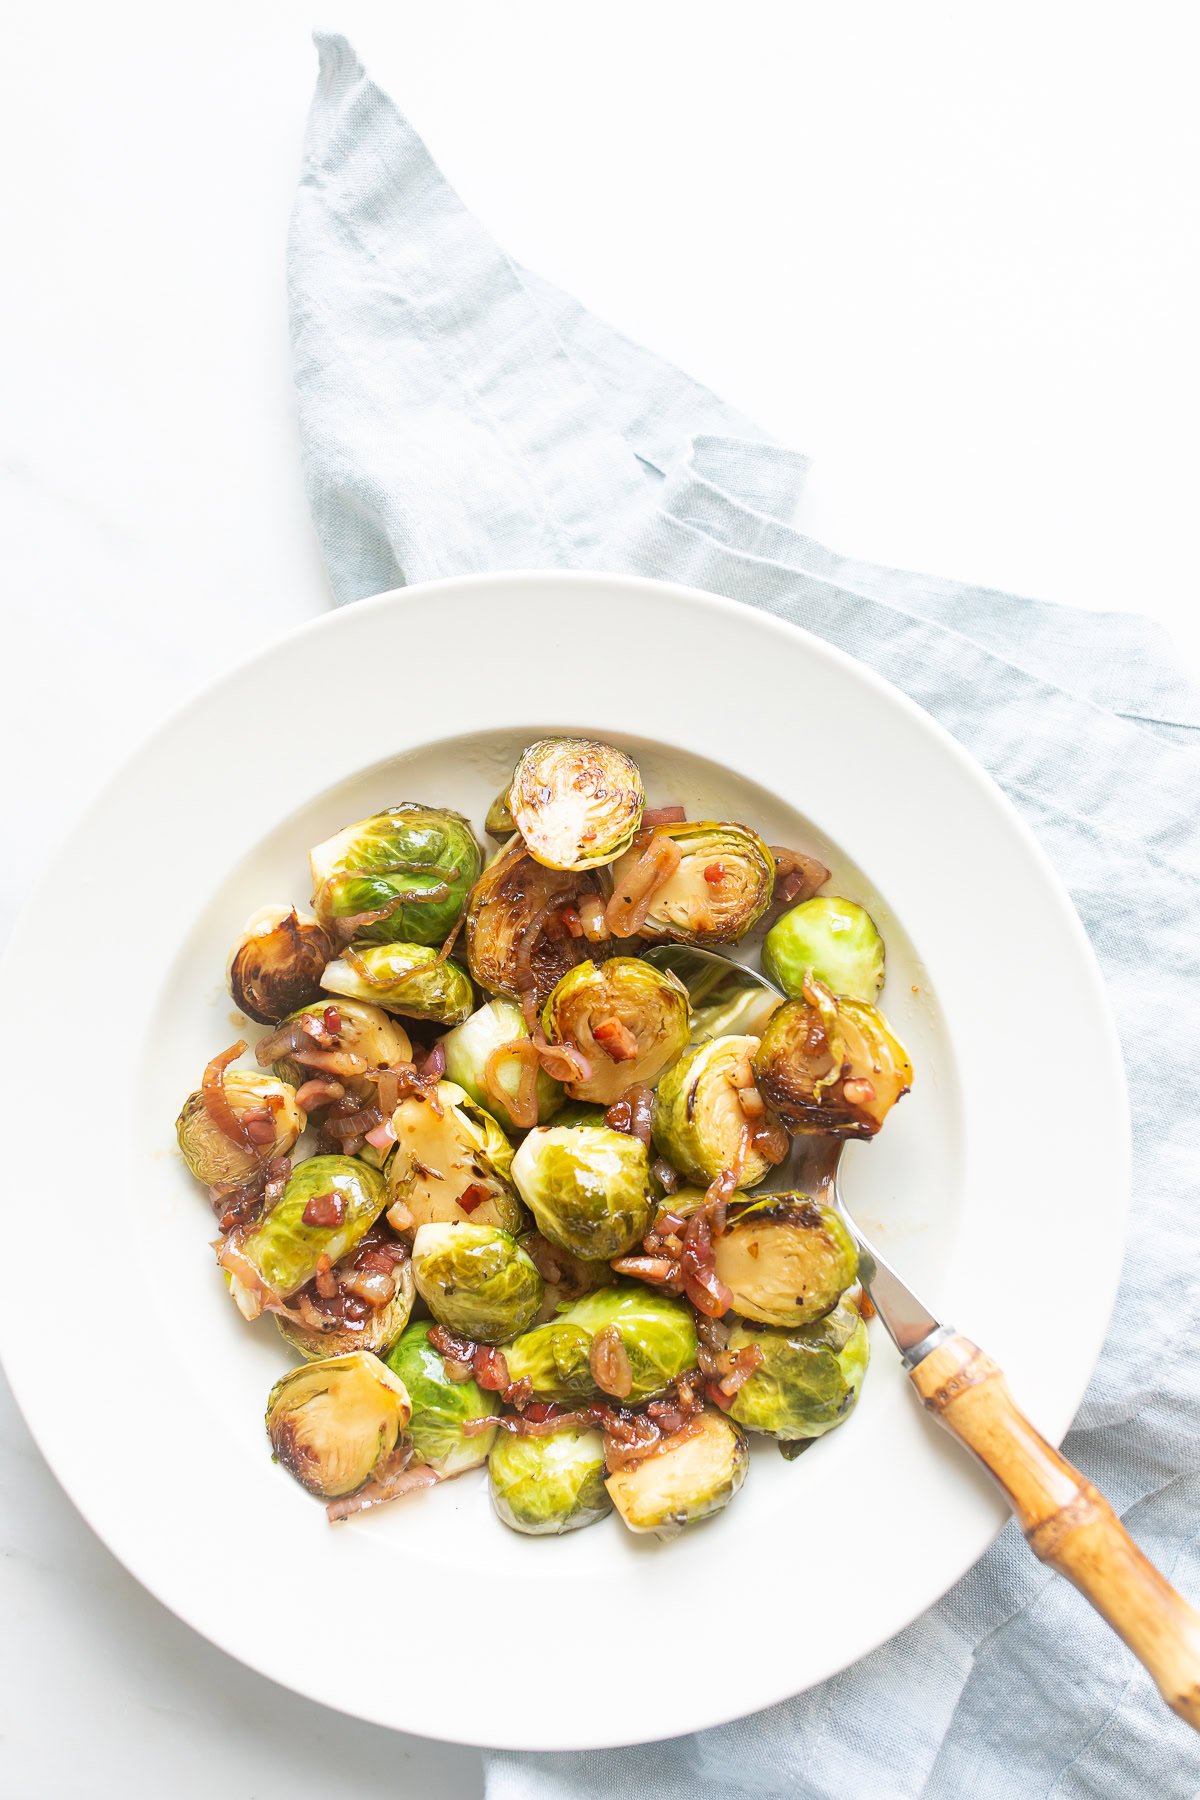 A white plate with cooked Brussels sprouts, a perfect meatloaf side, garnished with caramelized onions and garlic on a light blue cloth. A fork with a wooden handle rests on the plate.